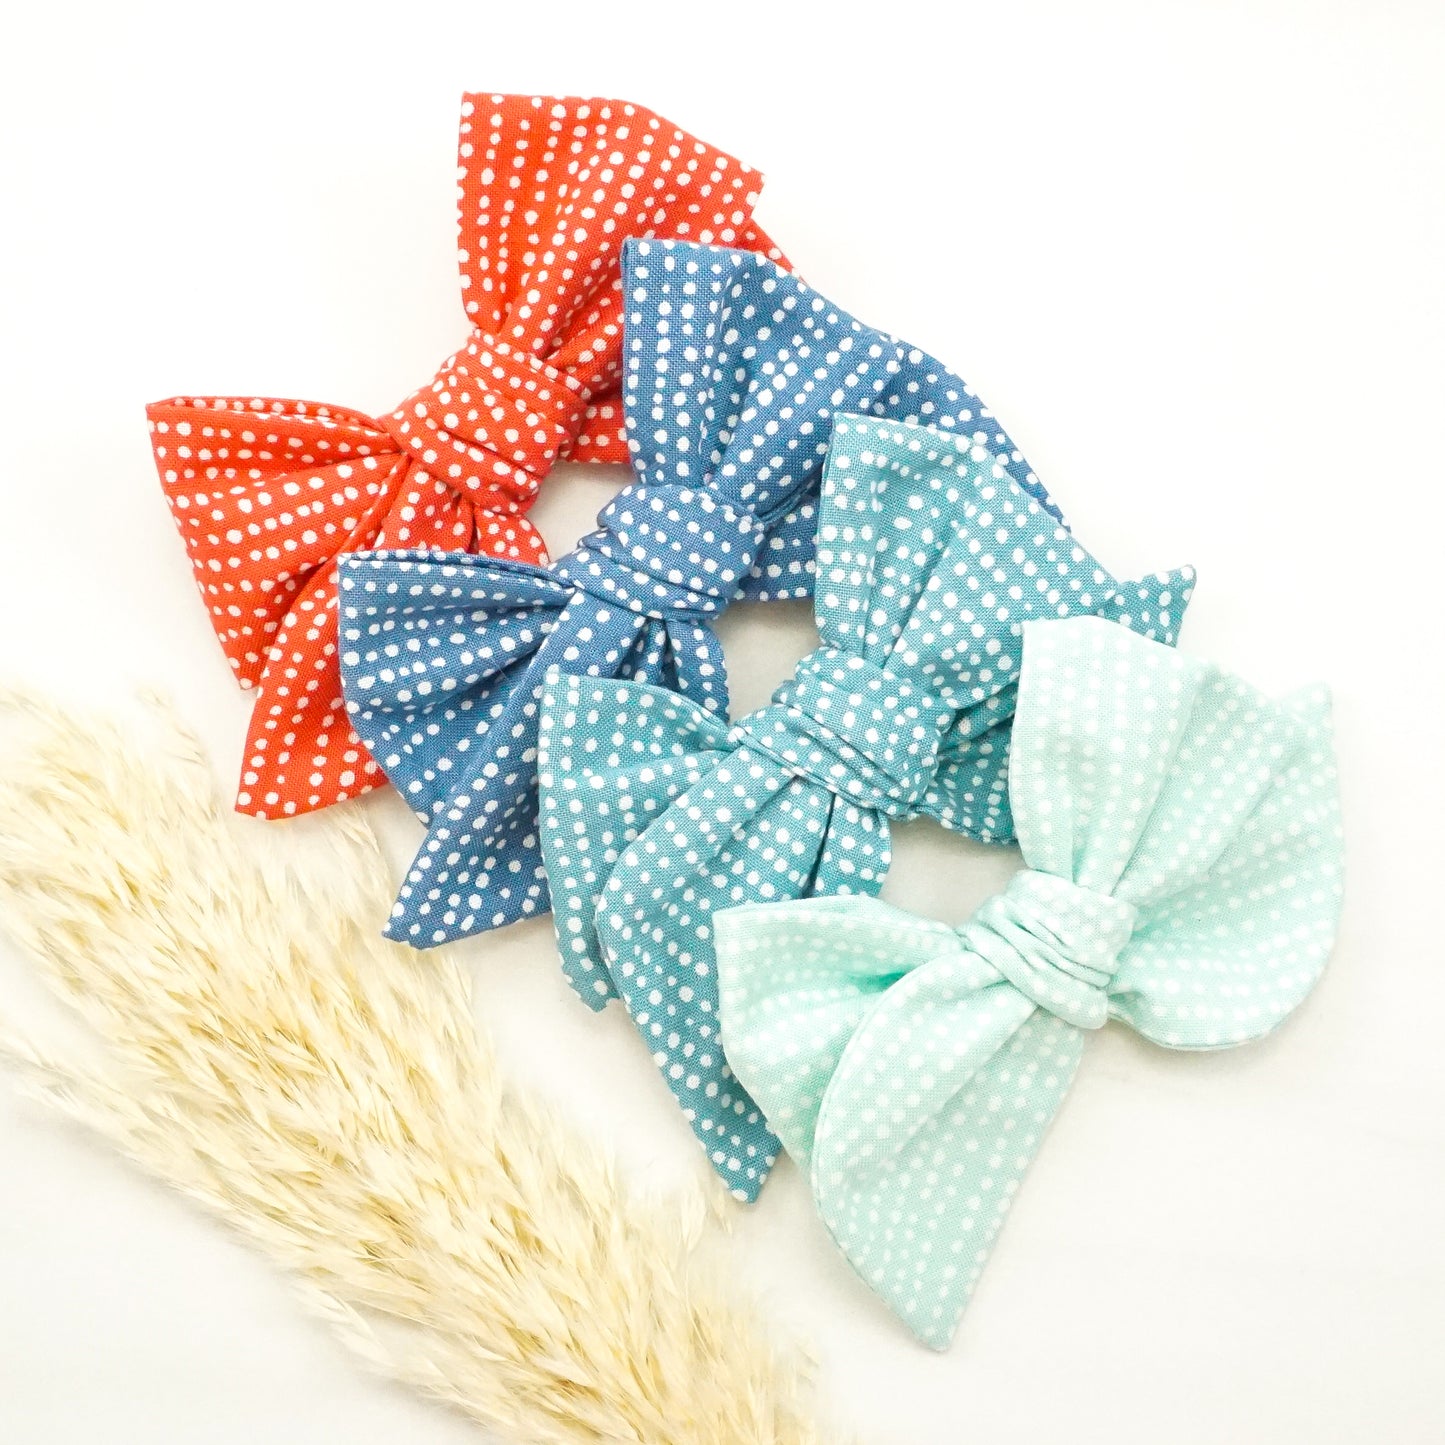 Handtied Fabric Bow - Ready to Ship (clip attached, see description) - Mint Green Snowfall